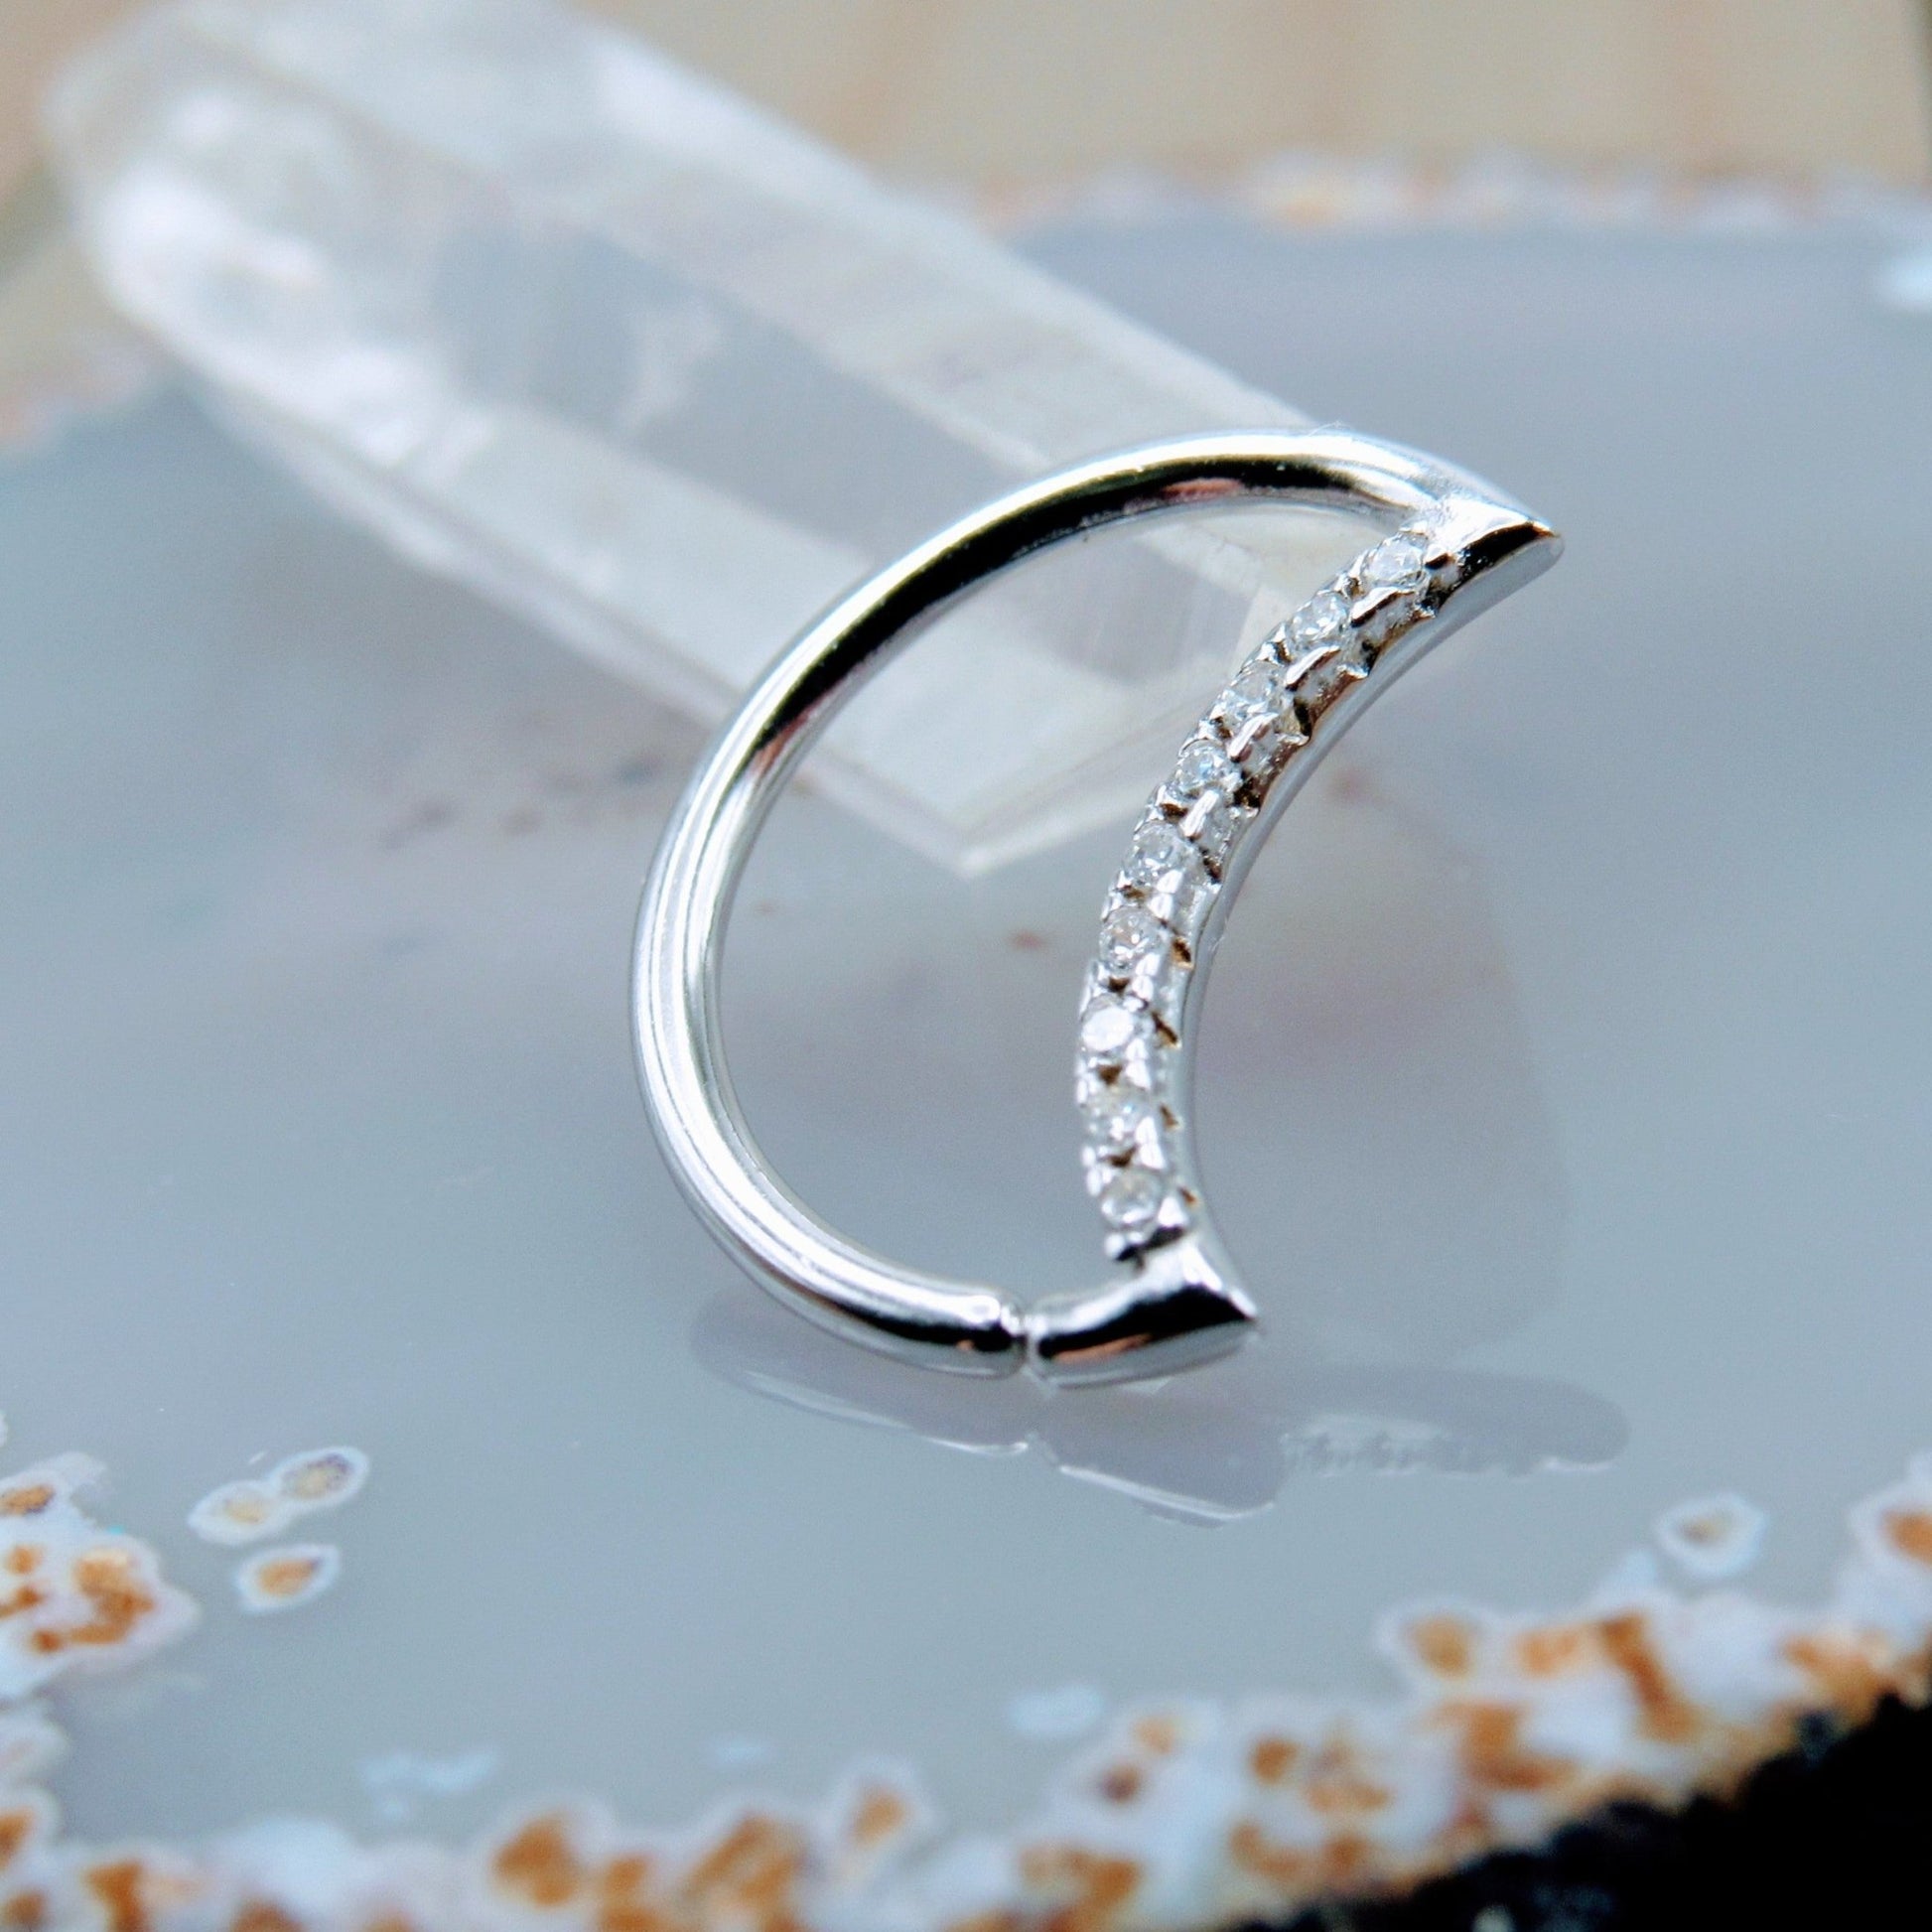 Crescent moon crystal gemstone silver easy bend seam ring daith rook helix piercing hoop .925 sterling silver - Siren Body Jewelry